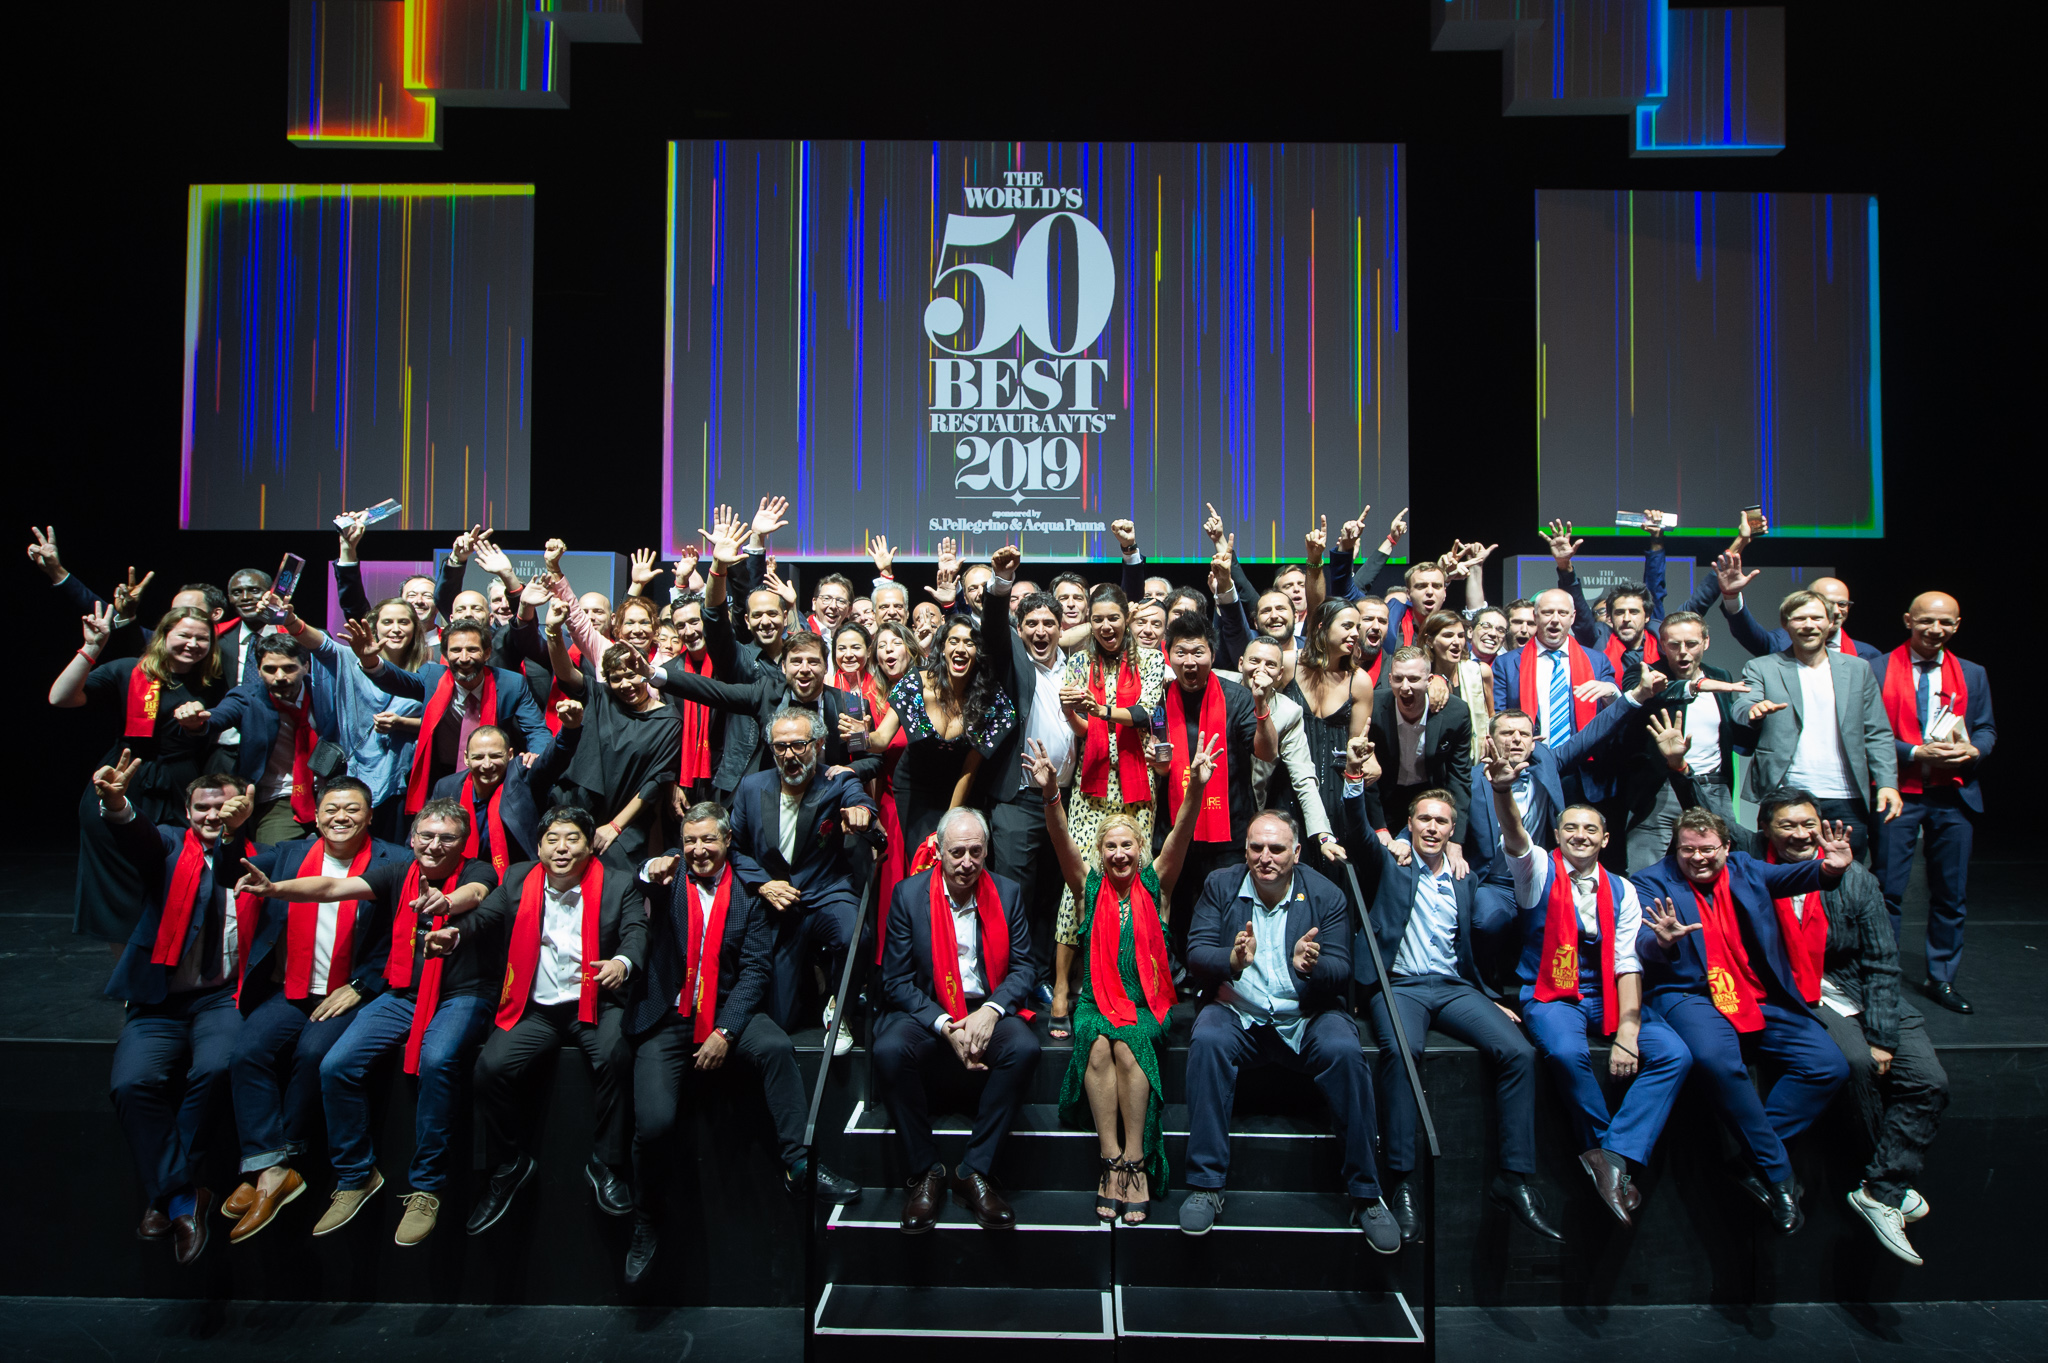 Diversity and inclusivity were two of the key highlights at the 2019 World's 50 Best Restaurants ceremony in Singapore